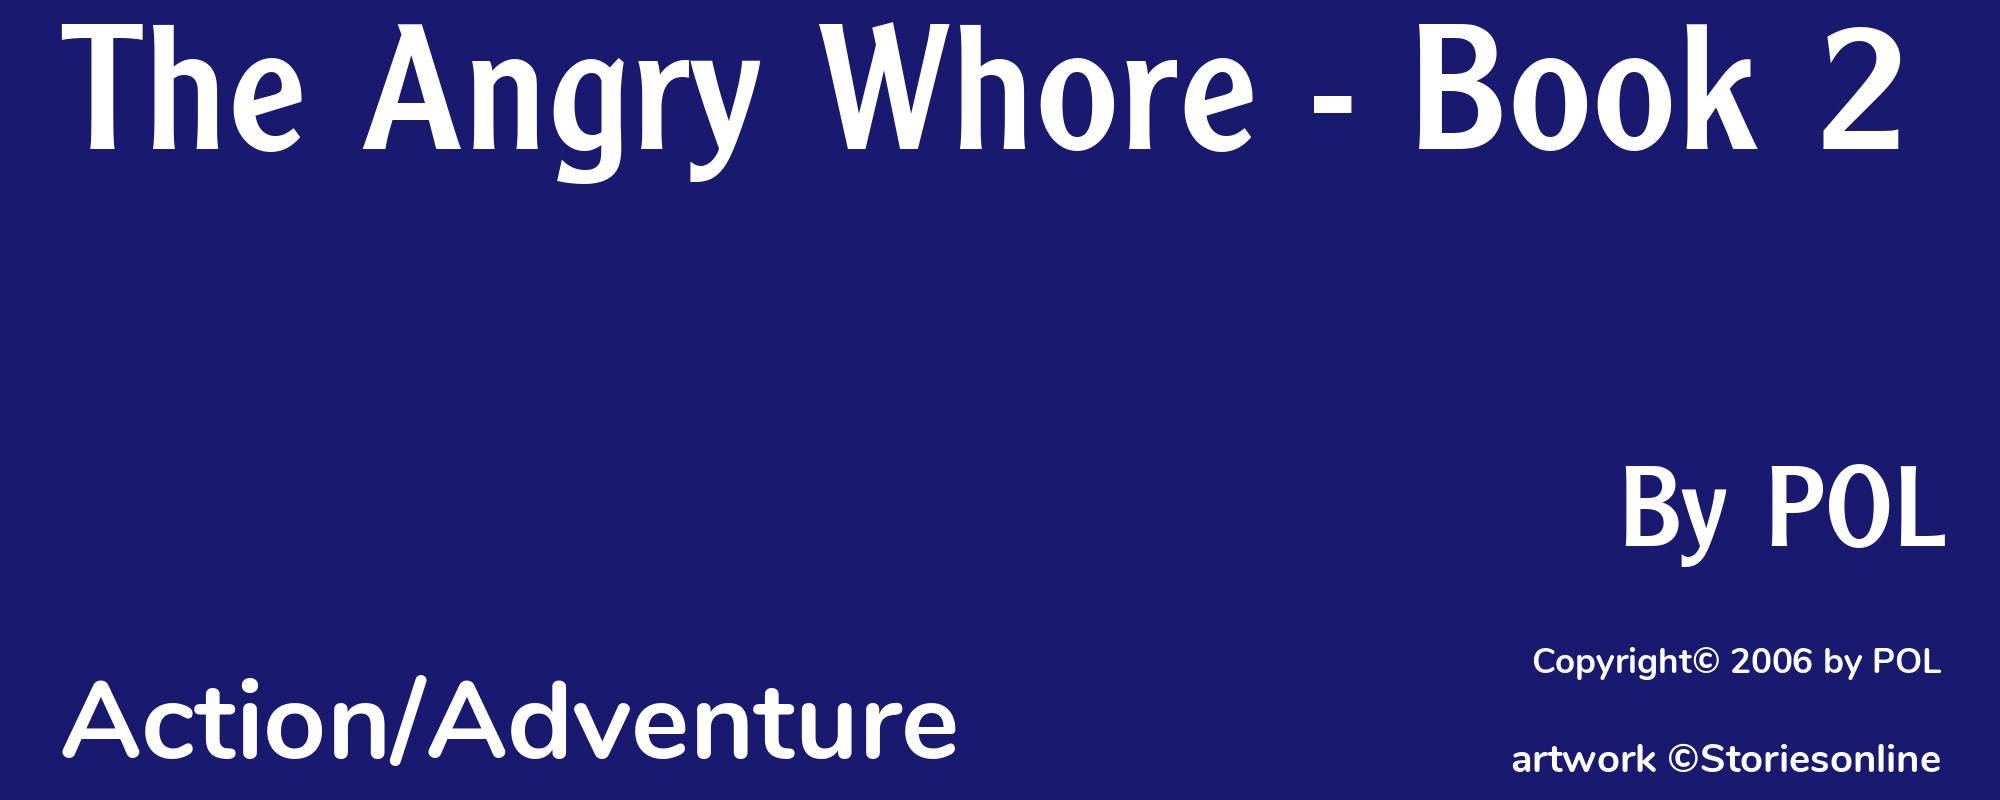 The Angry Whore - Book 2 - Cover